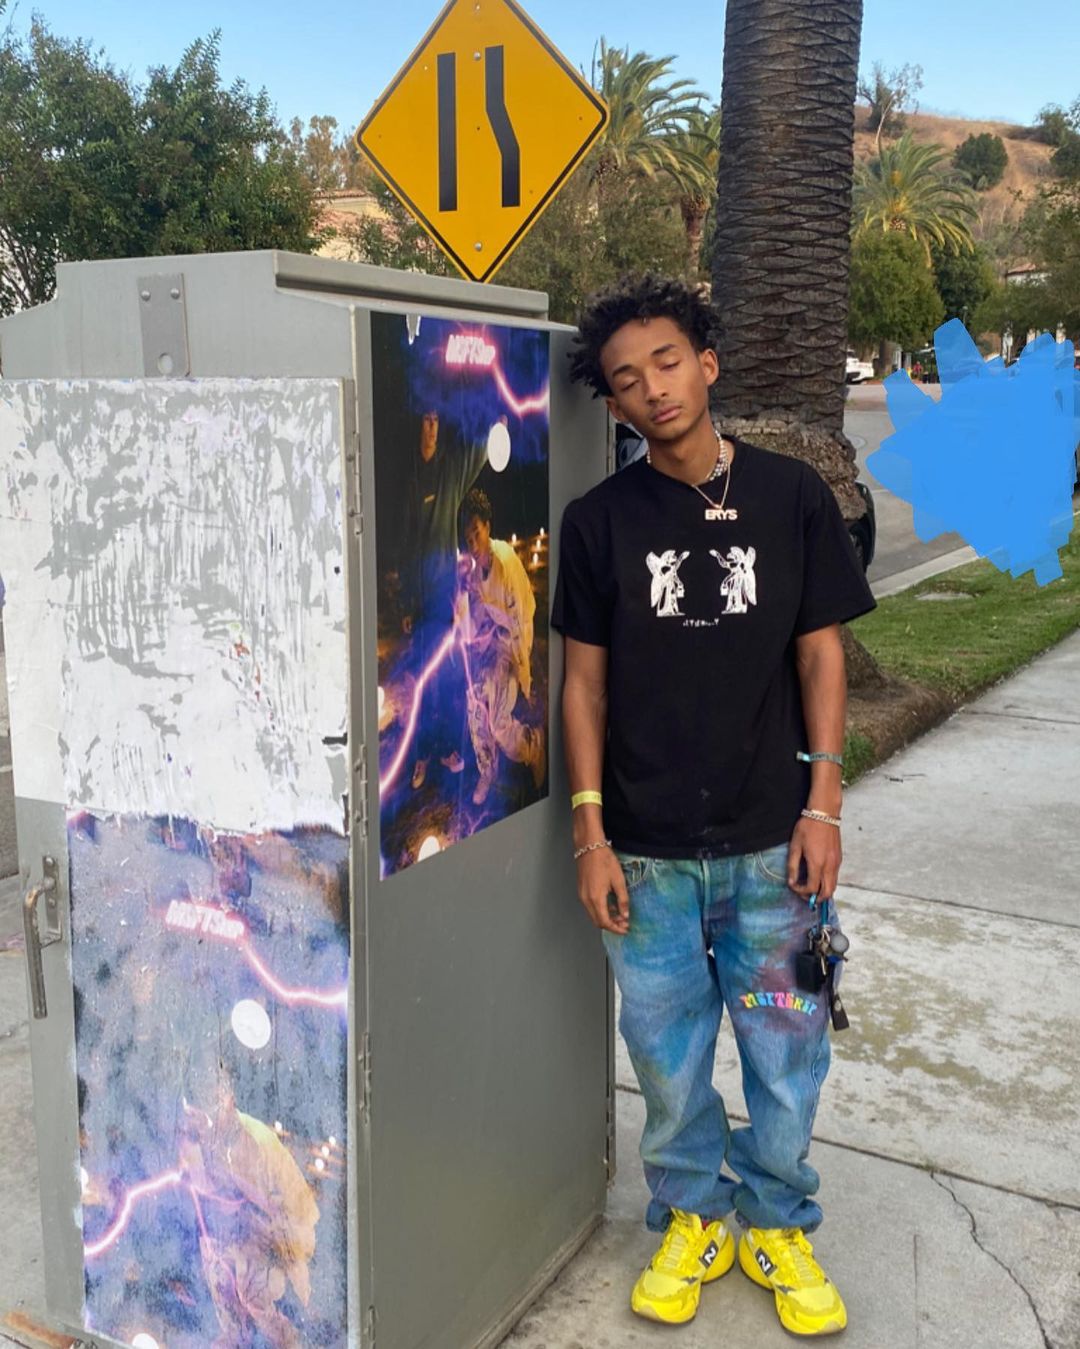 SPOTTED: Jaden Smith In Louis Vuitton, MSFTSrep Jeans And Adidas